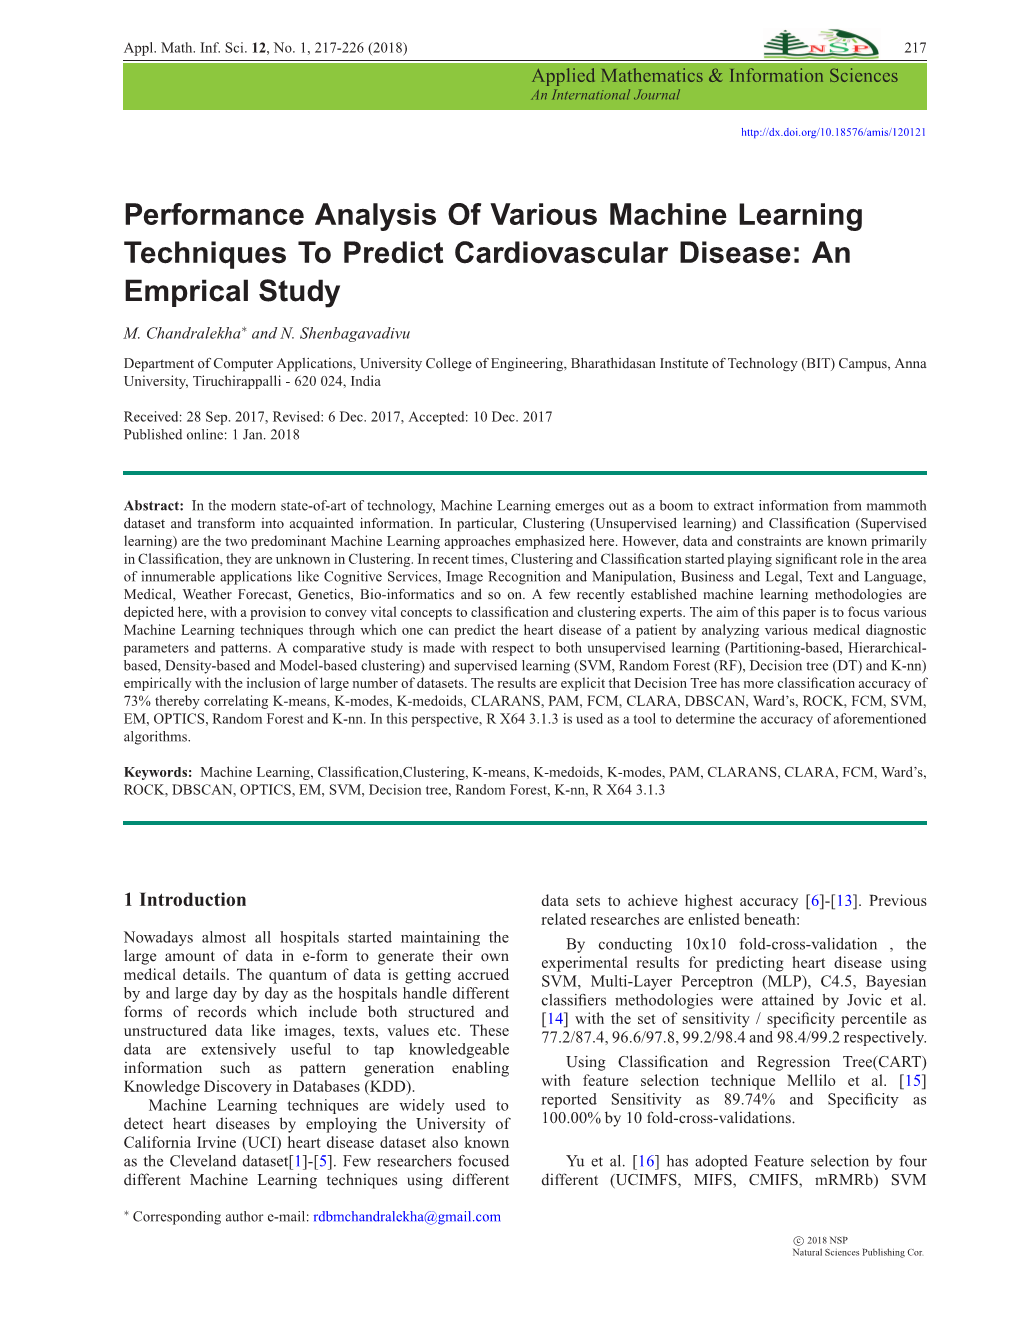 Performance Analysis of Various Machine Learning Techniques to Predict Cardiovascular Disease: an Emprical Study